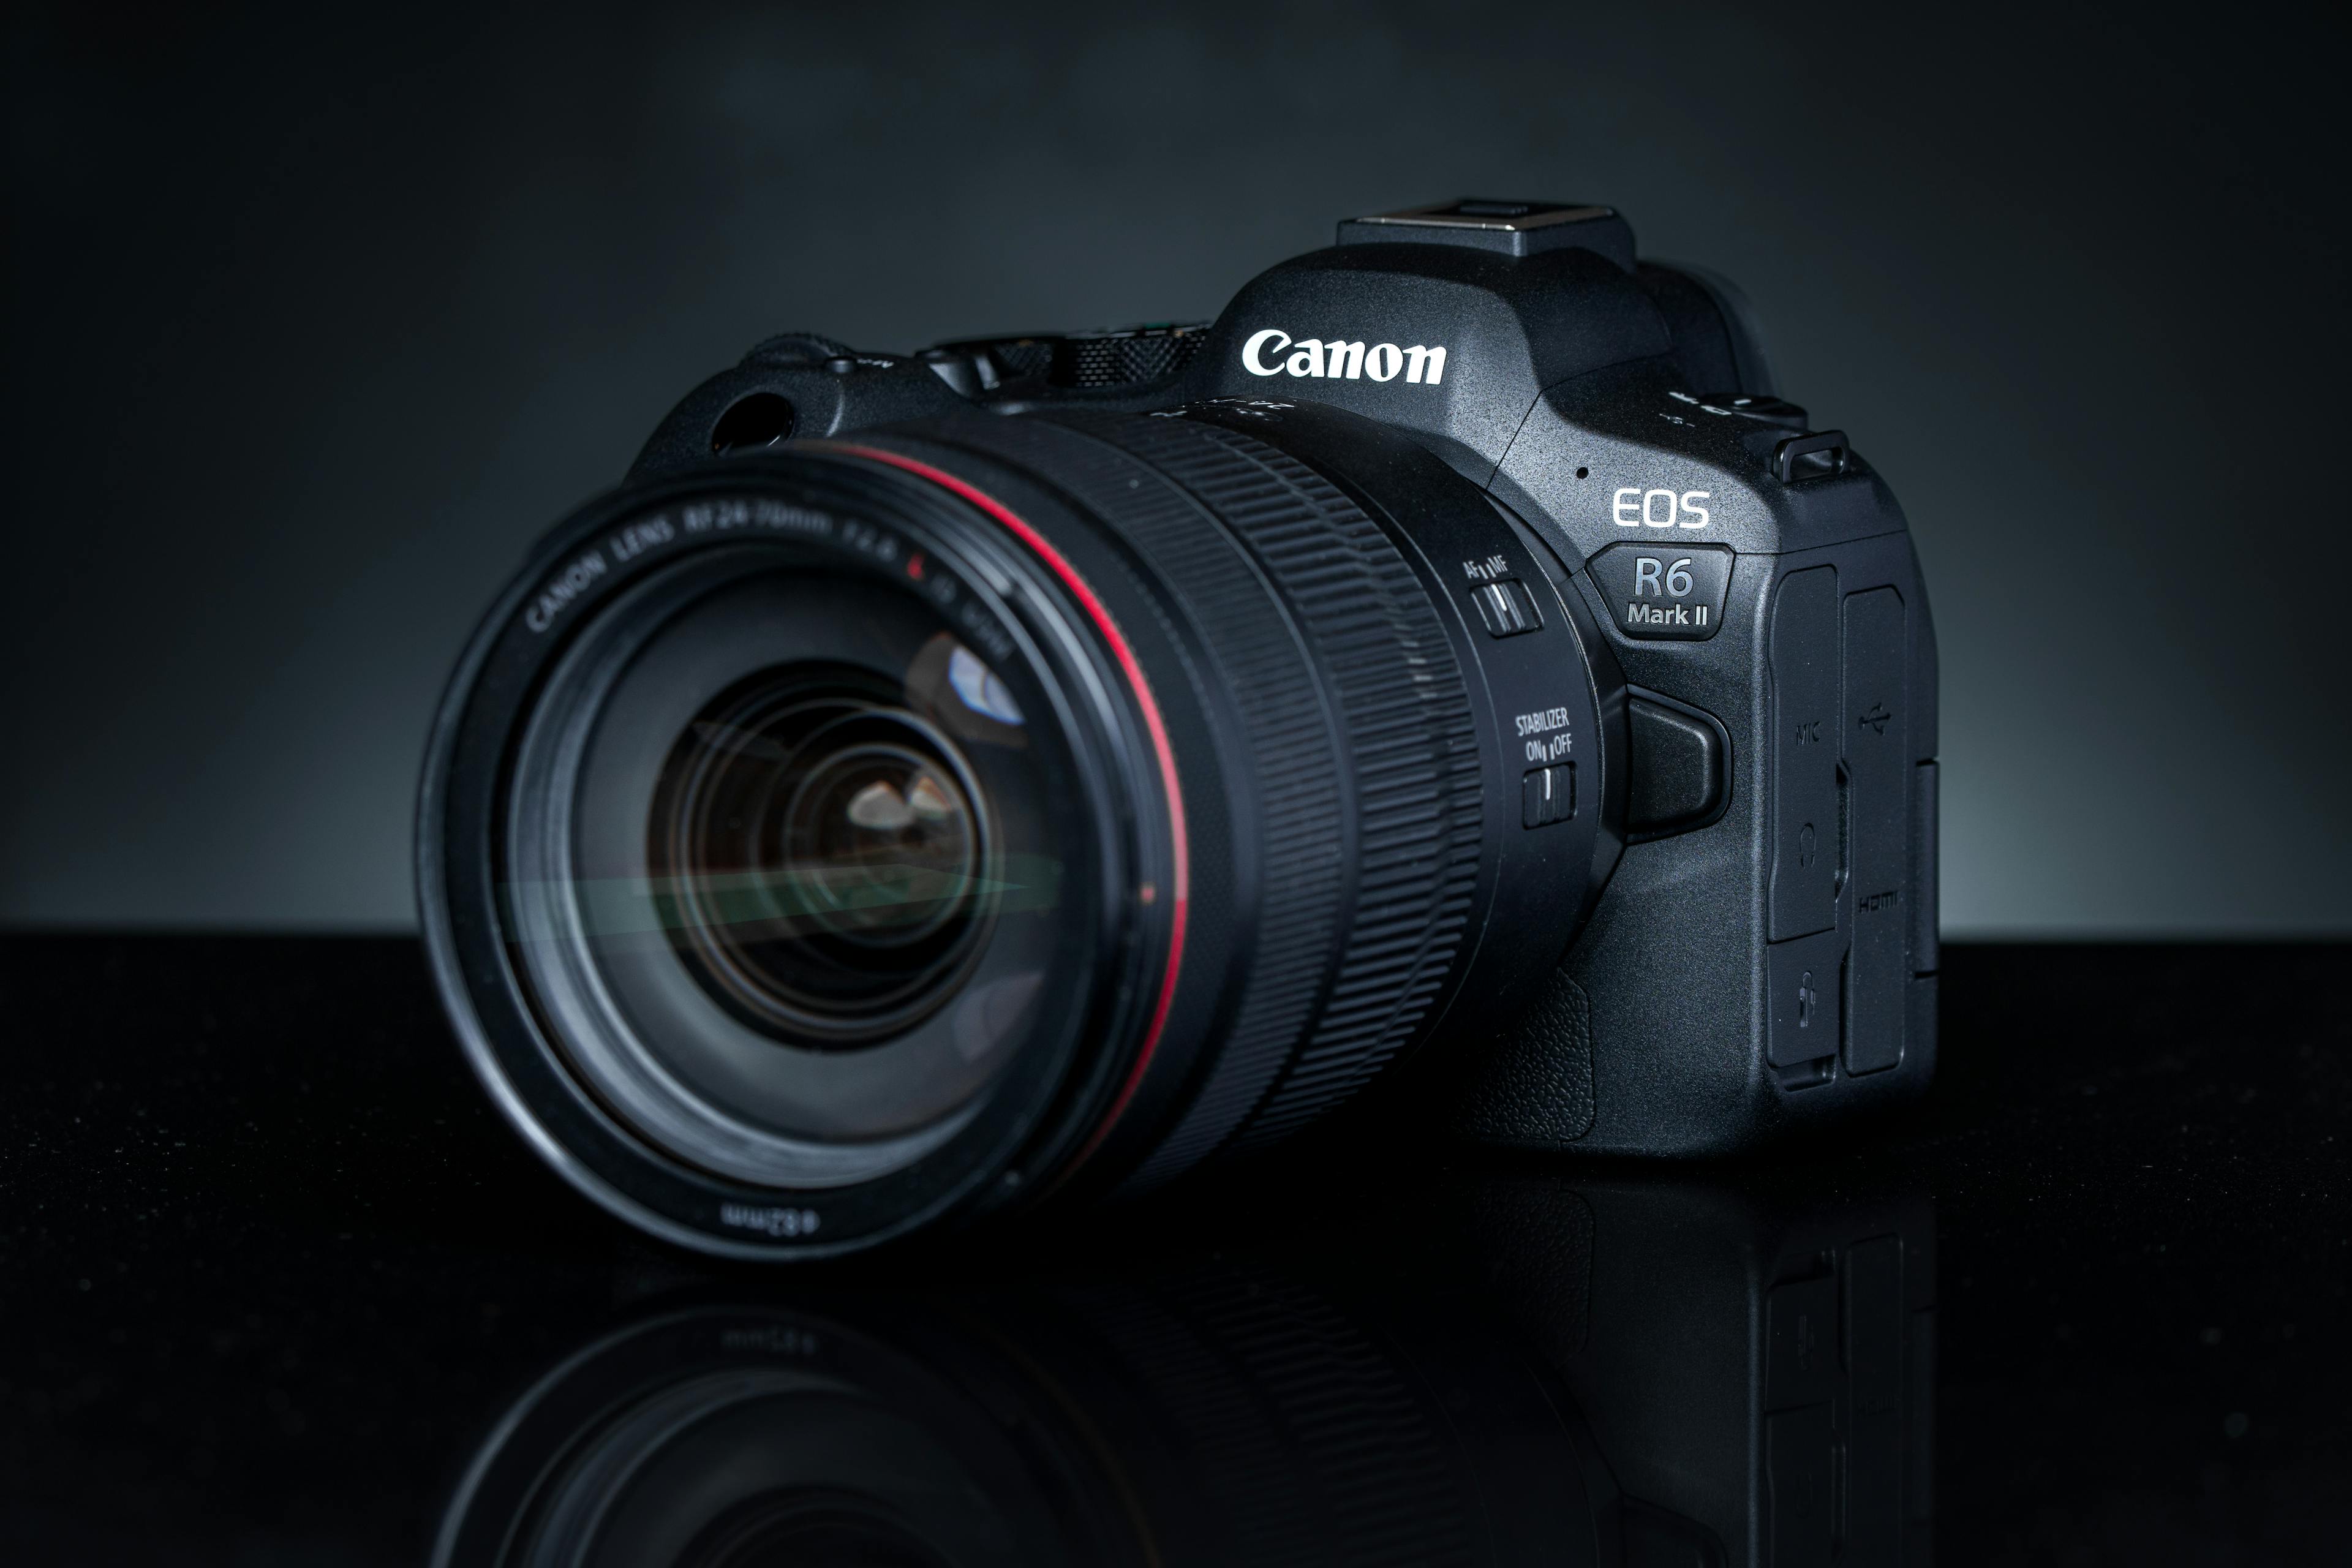 Cover Image for Discovering the Canon EOS R6: A Versatile All-Rounder